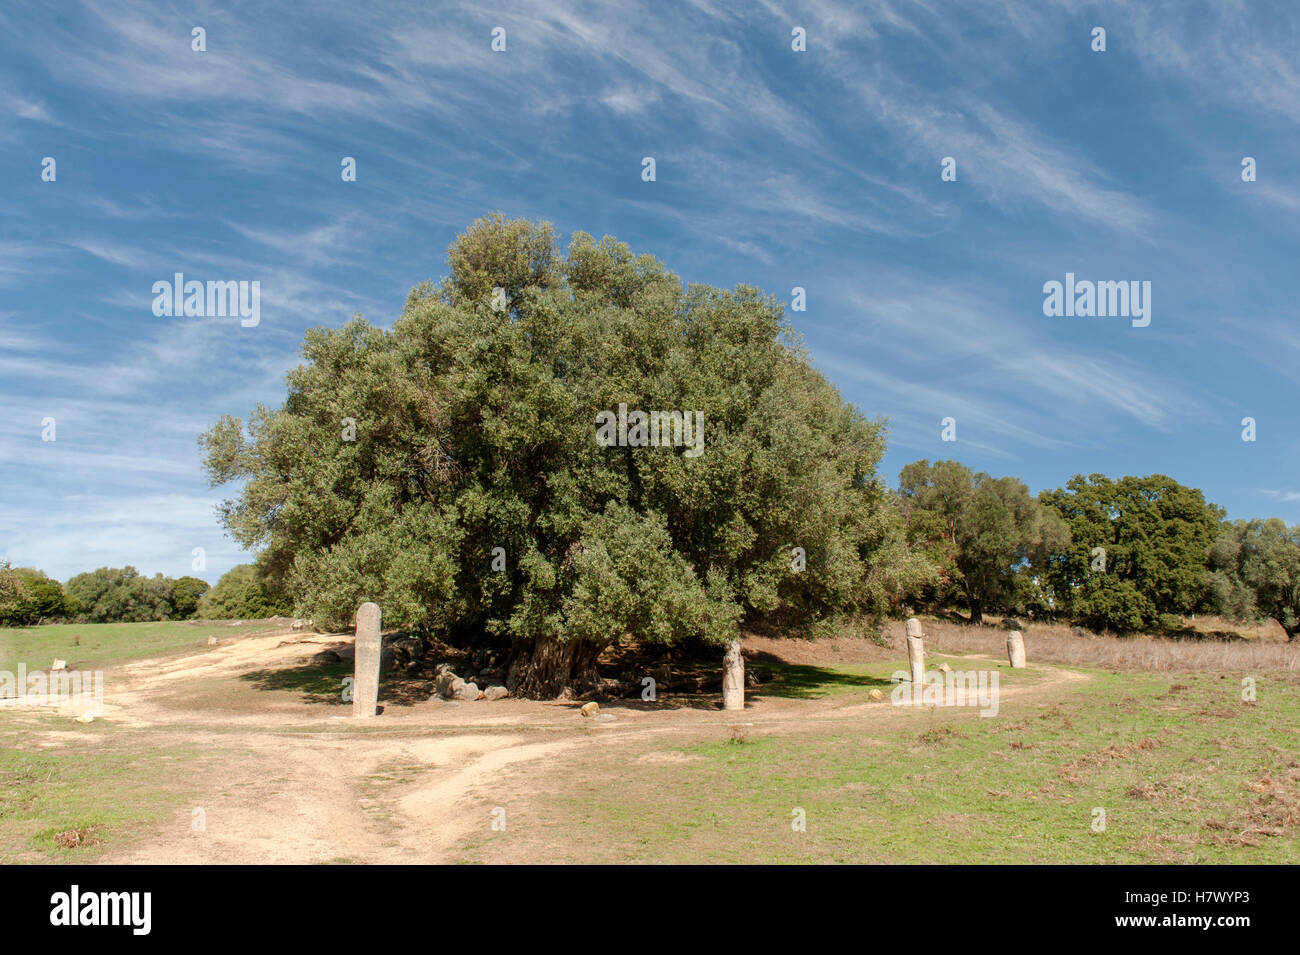 Olive tree with ring of menhirs at Filitosa, the prehistoric capital of Corsica, featuring dolmen, menhirs, and Torrean relicts Stock Photo